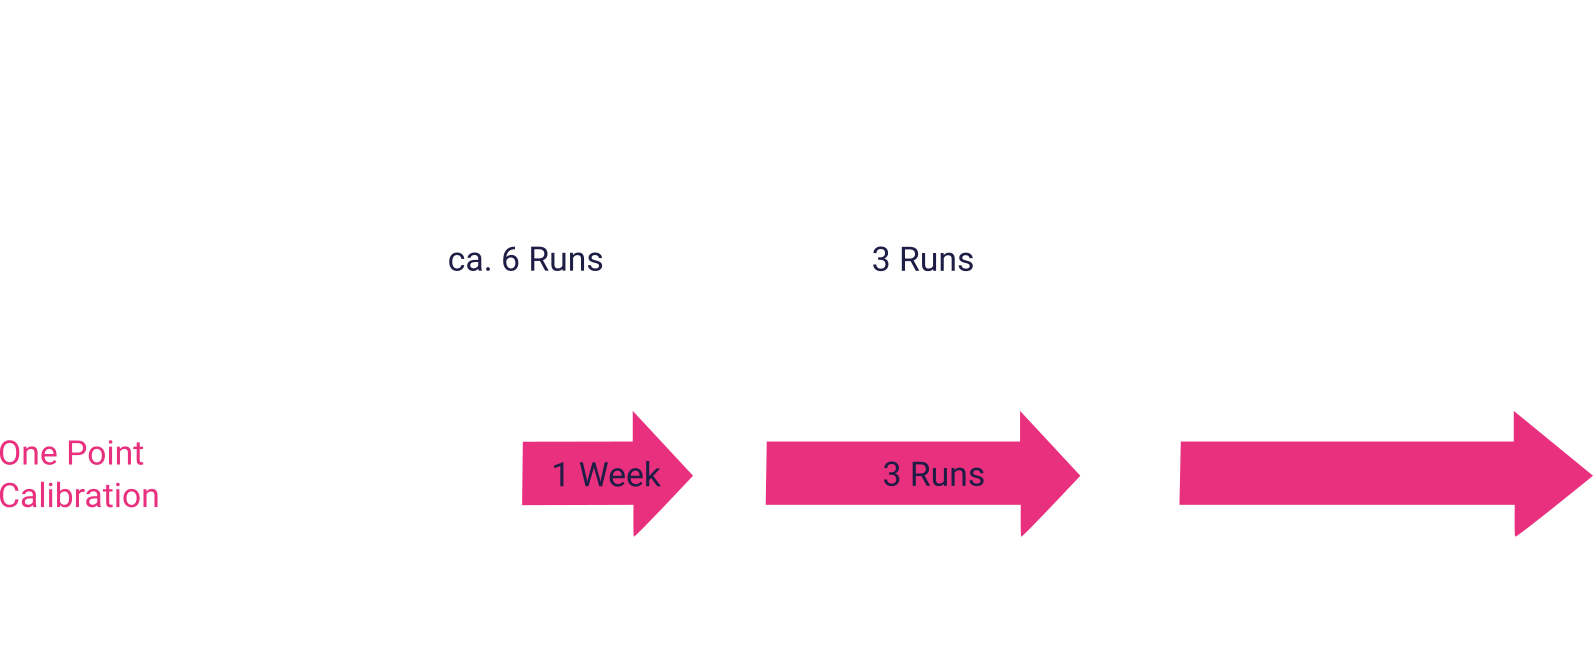 IRUBIS Calibration Model Building. One Point Calibration compared to standard calibration model building